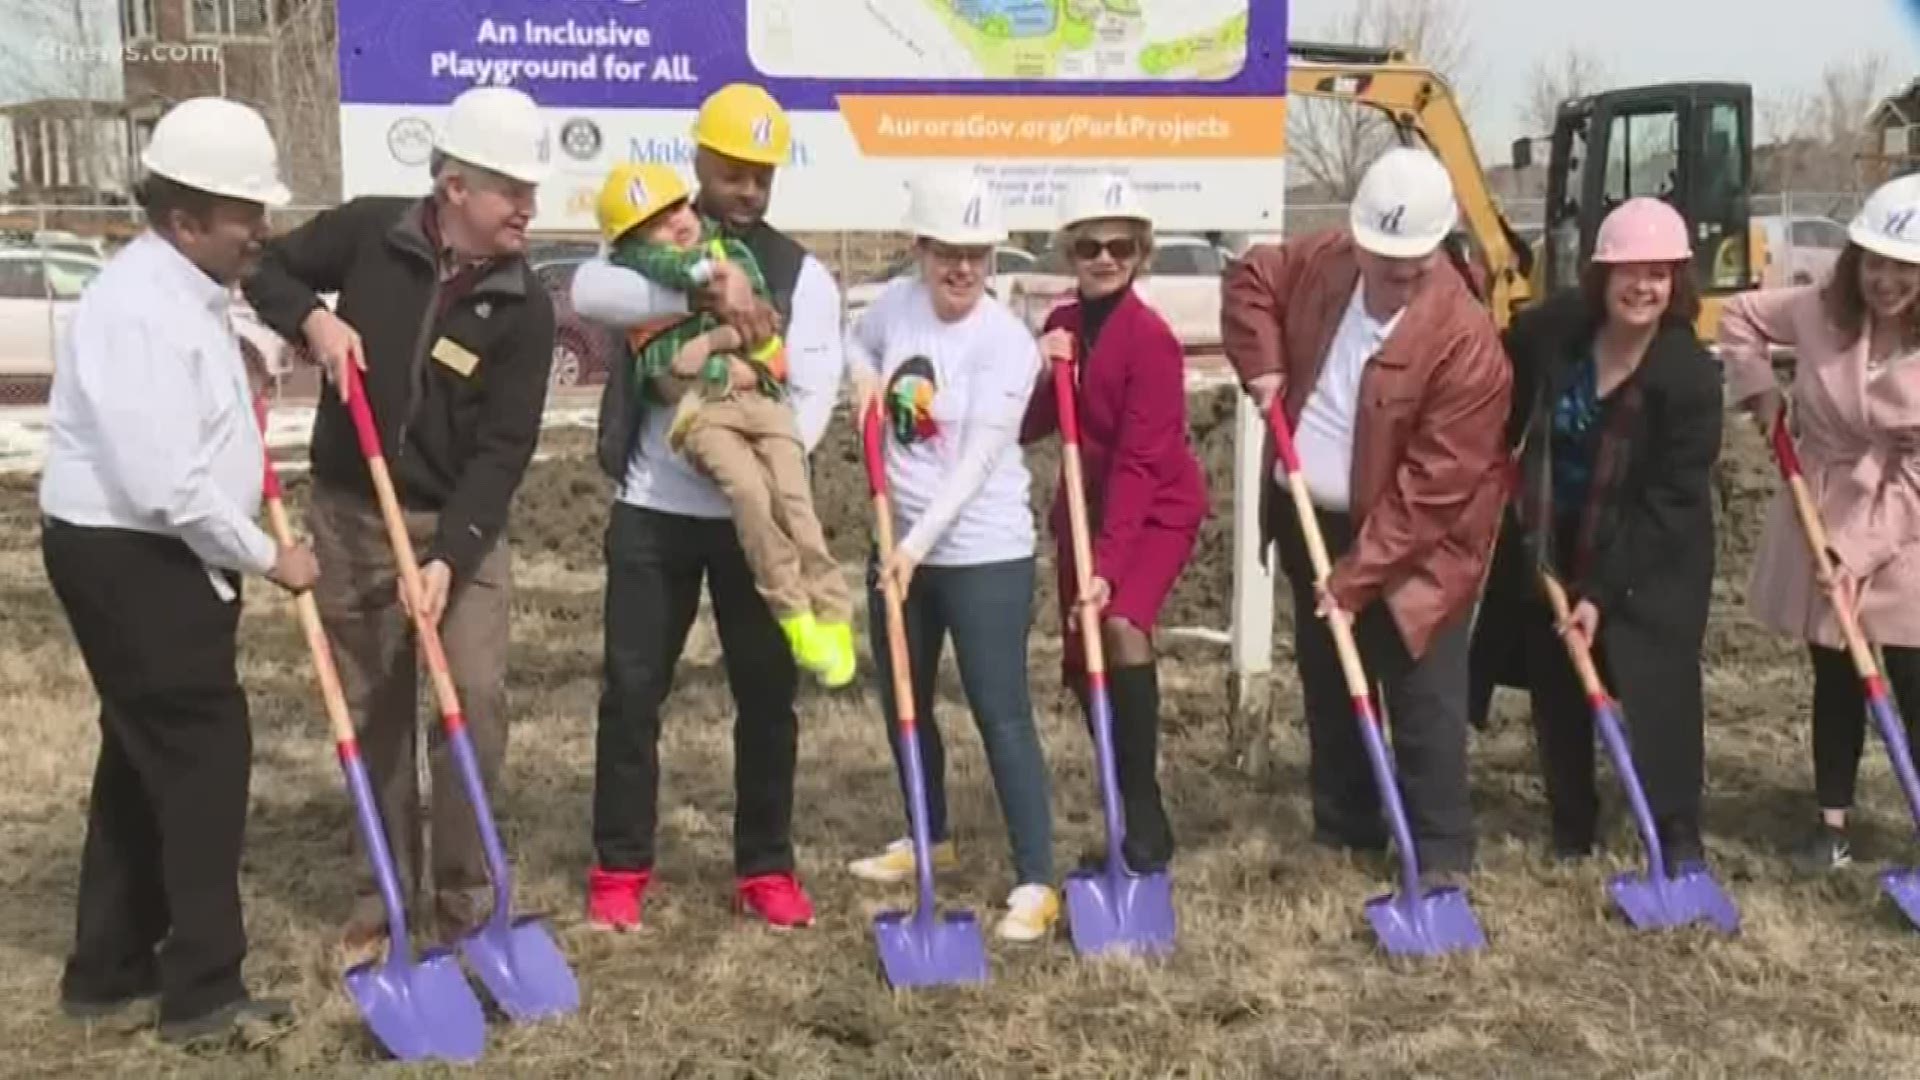 Red-tailed Hawk Park will have features accessible to kids in wheelchairs and walkers. The project was inspired by Ashaun Ramsey who had a wish to play with his friends like everyone else.